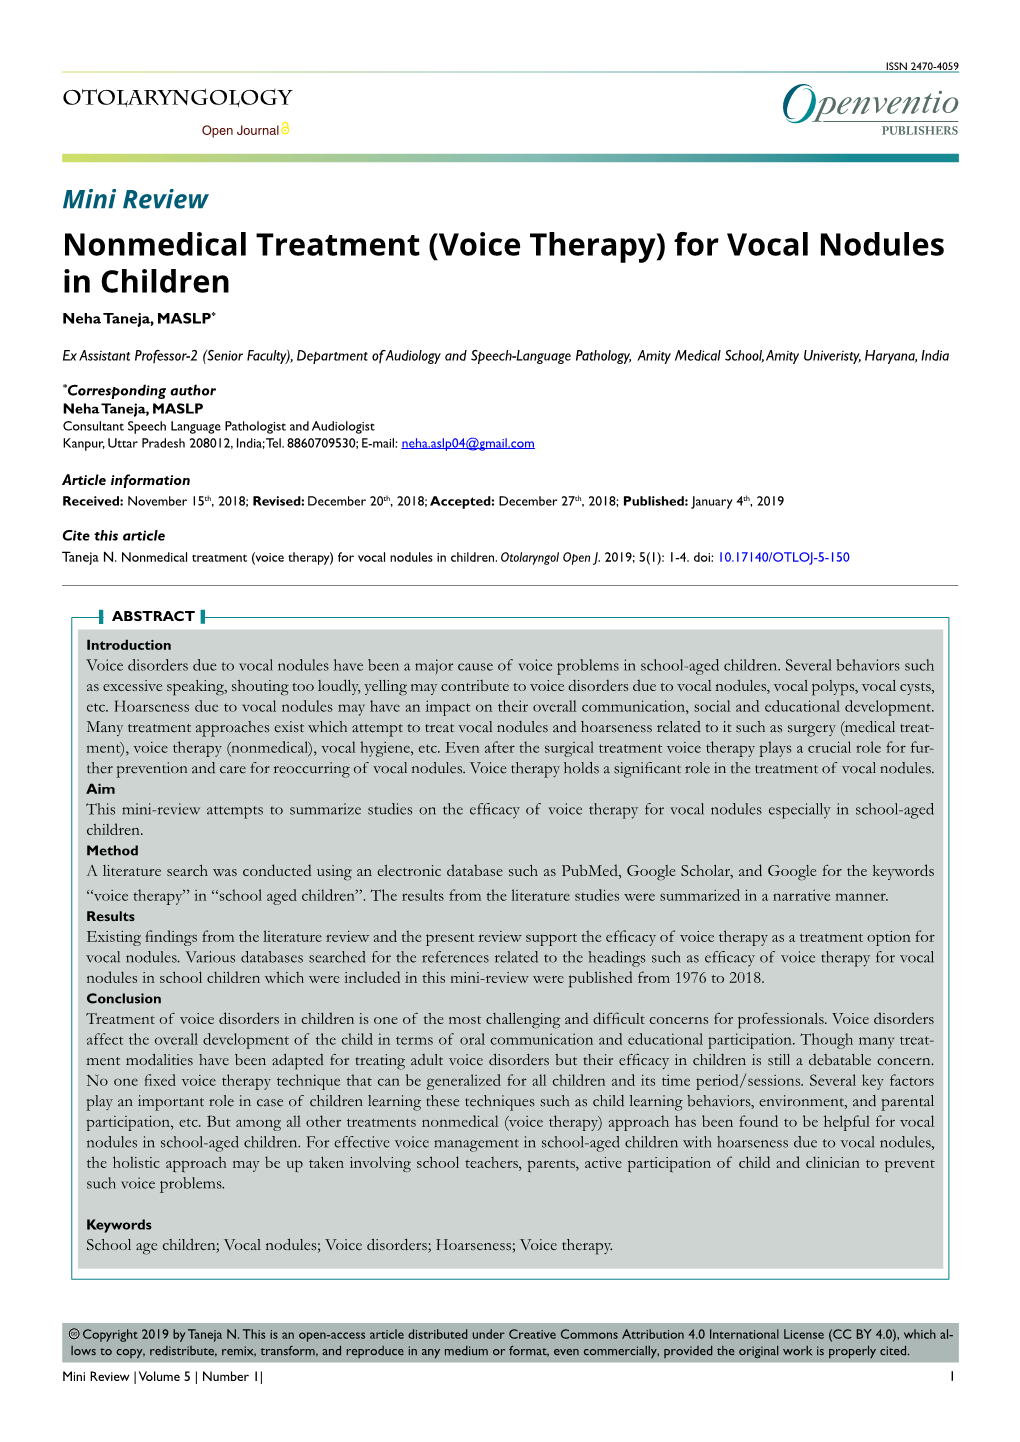 Nonmedical Treatment (Voice Therapy) for Vocal Nodules in Children Neha Taneja, MASLP*